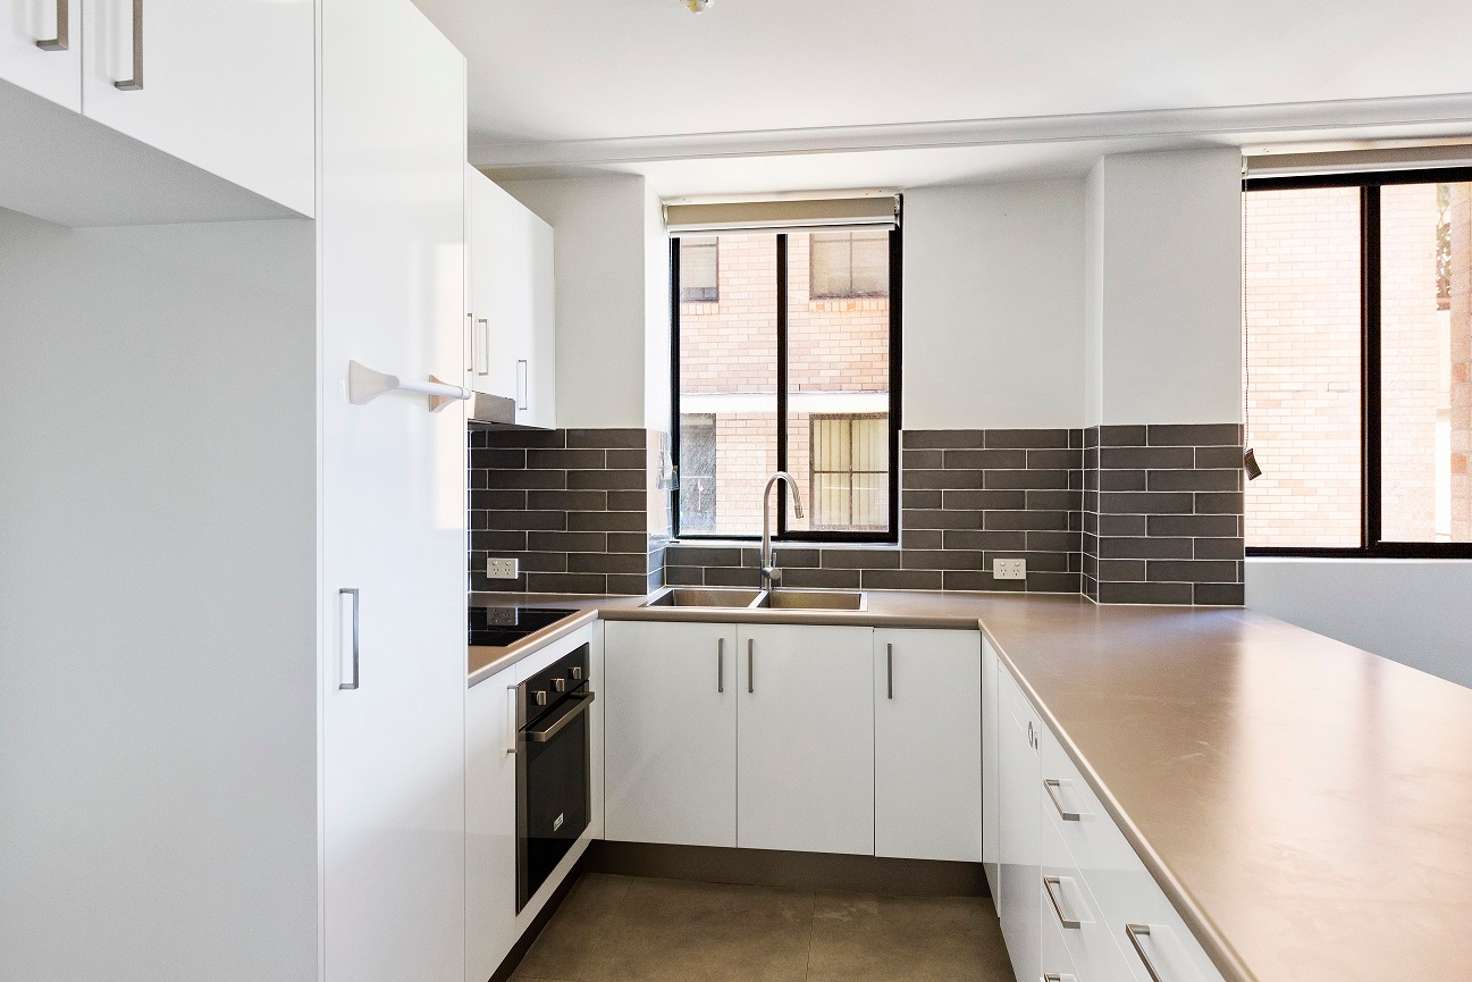 Main view of Homely apartment listing, 103/18 Oxford St, Darlinghurst NSW 2010